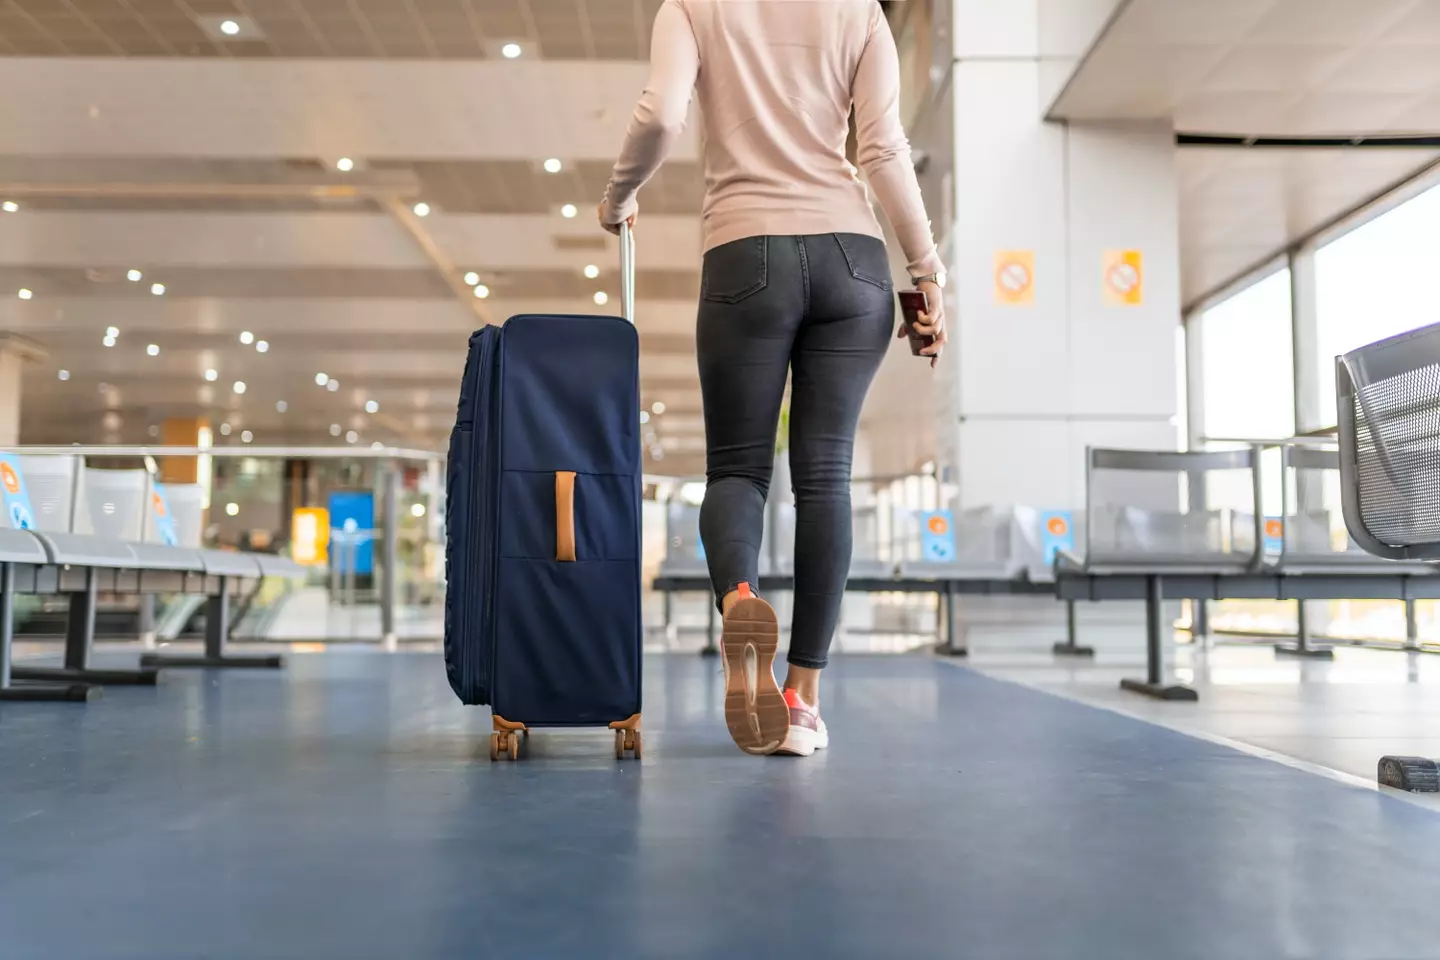 A woman on the way to check in her luggage (Getty Stock Images)